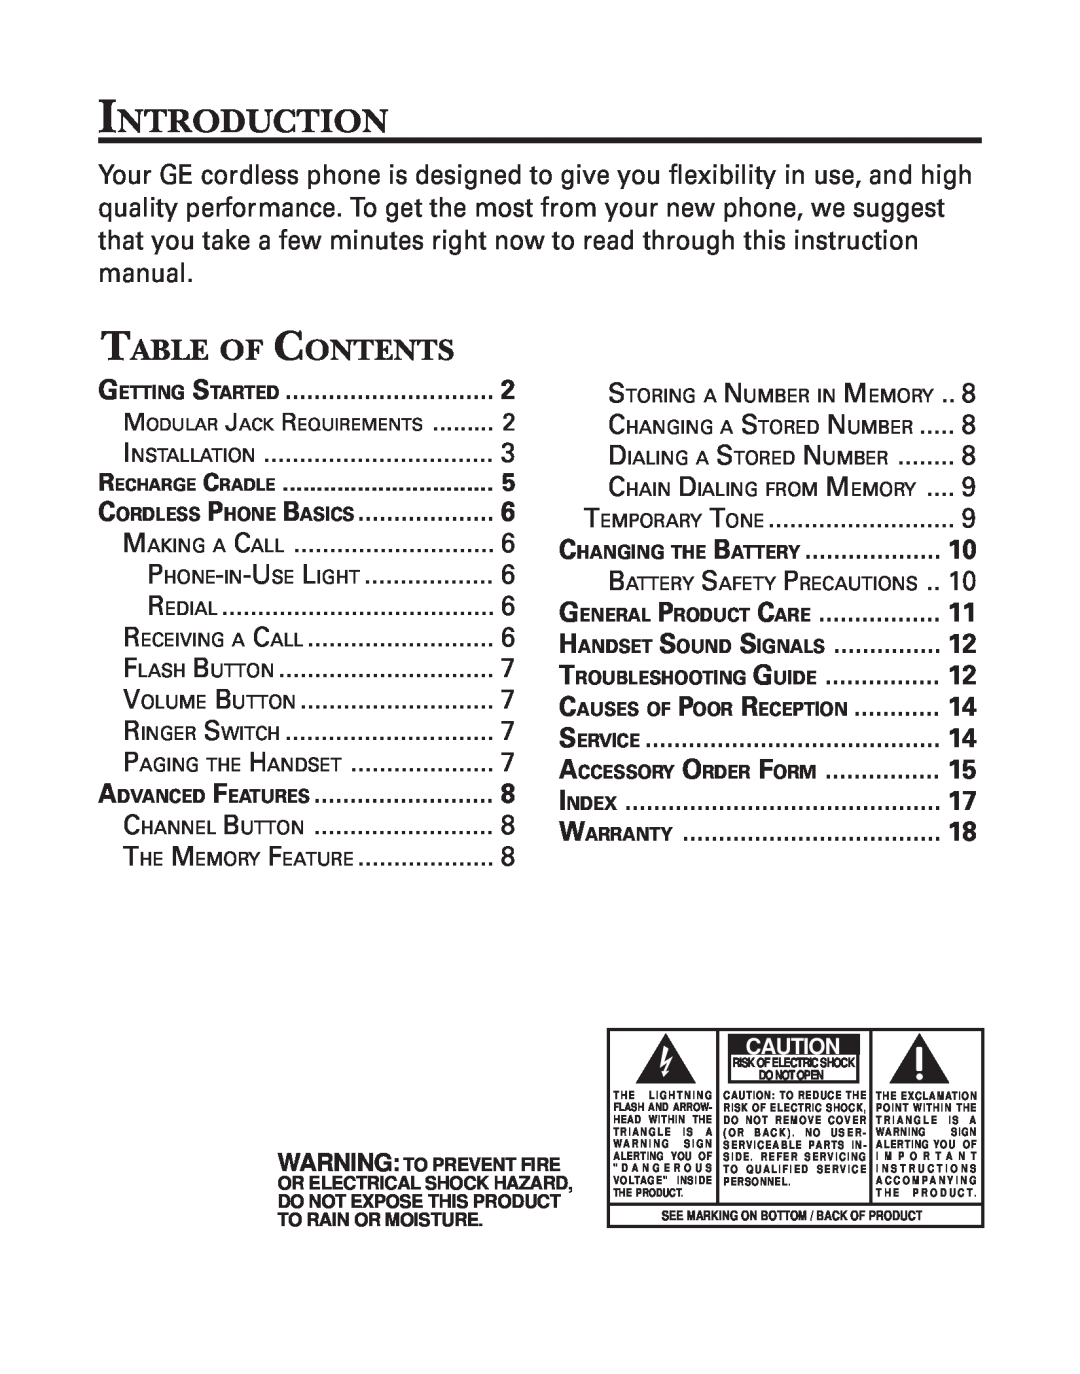 GE 2-9751, 2-9752, 2-9753 manual Introduction, Table Of Contents 